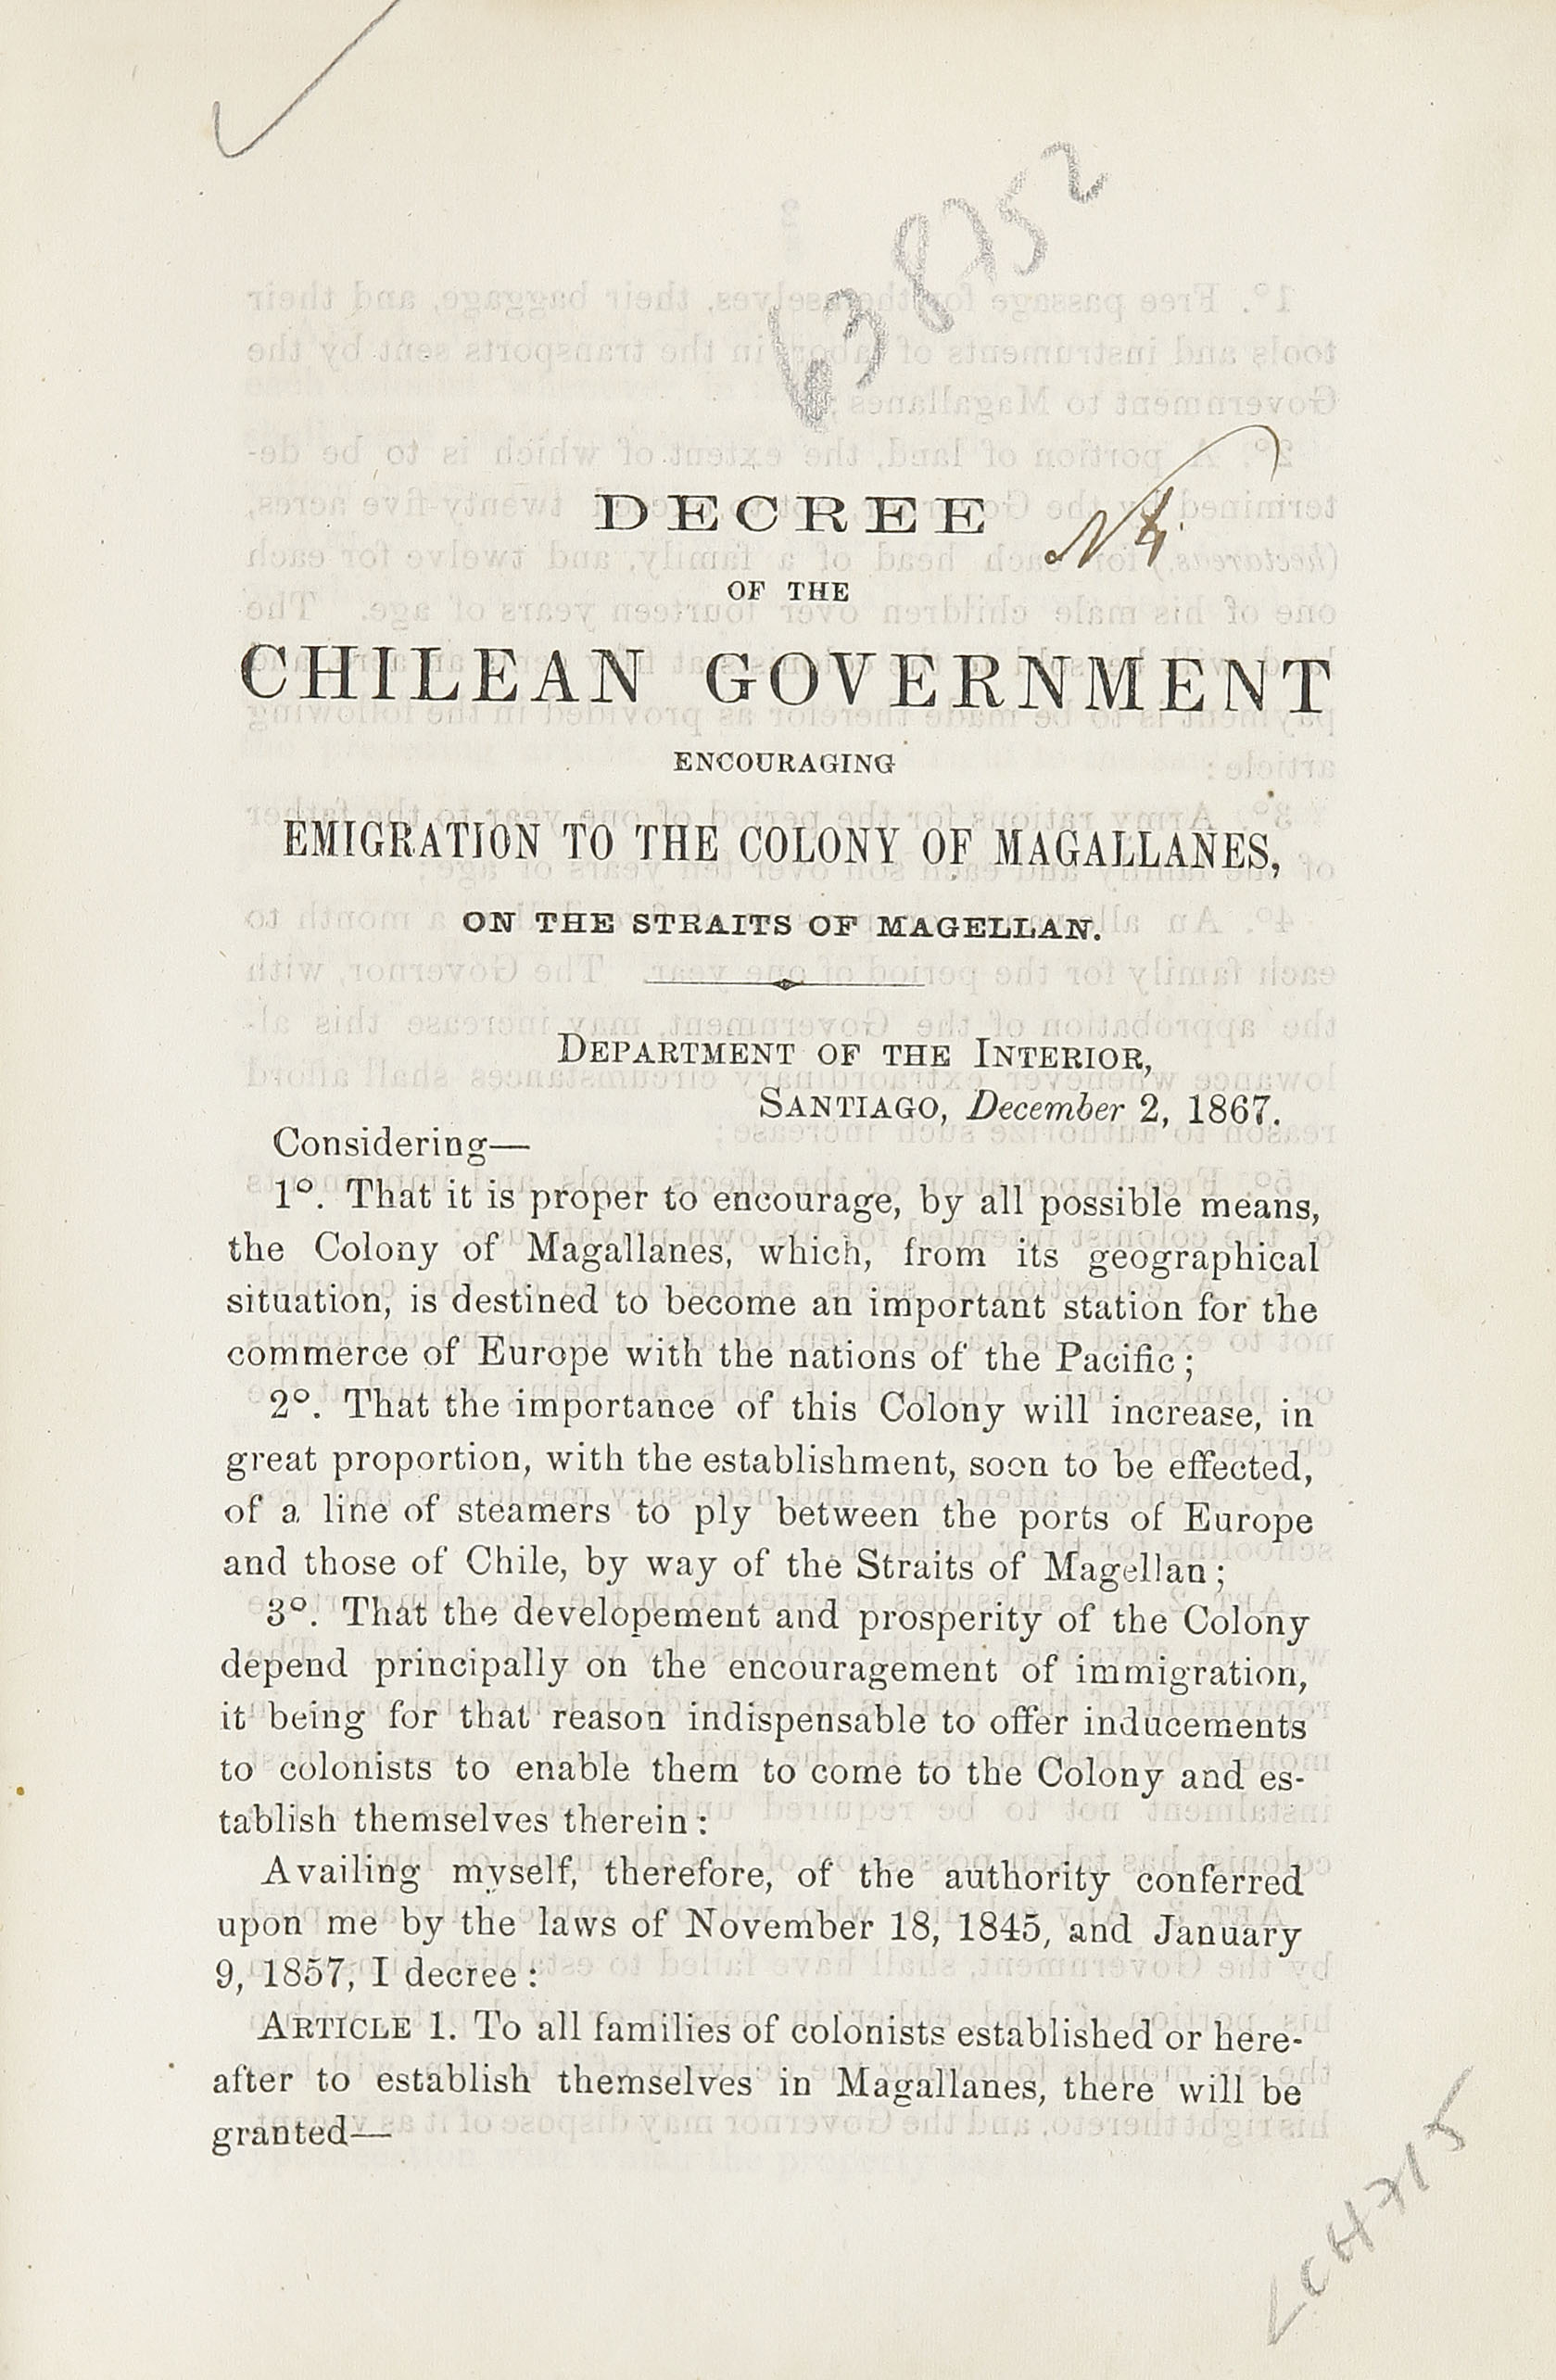 Decree of the Chilean Government : encouraging emigration to the colony of Magallanes on the straits of Magellan